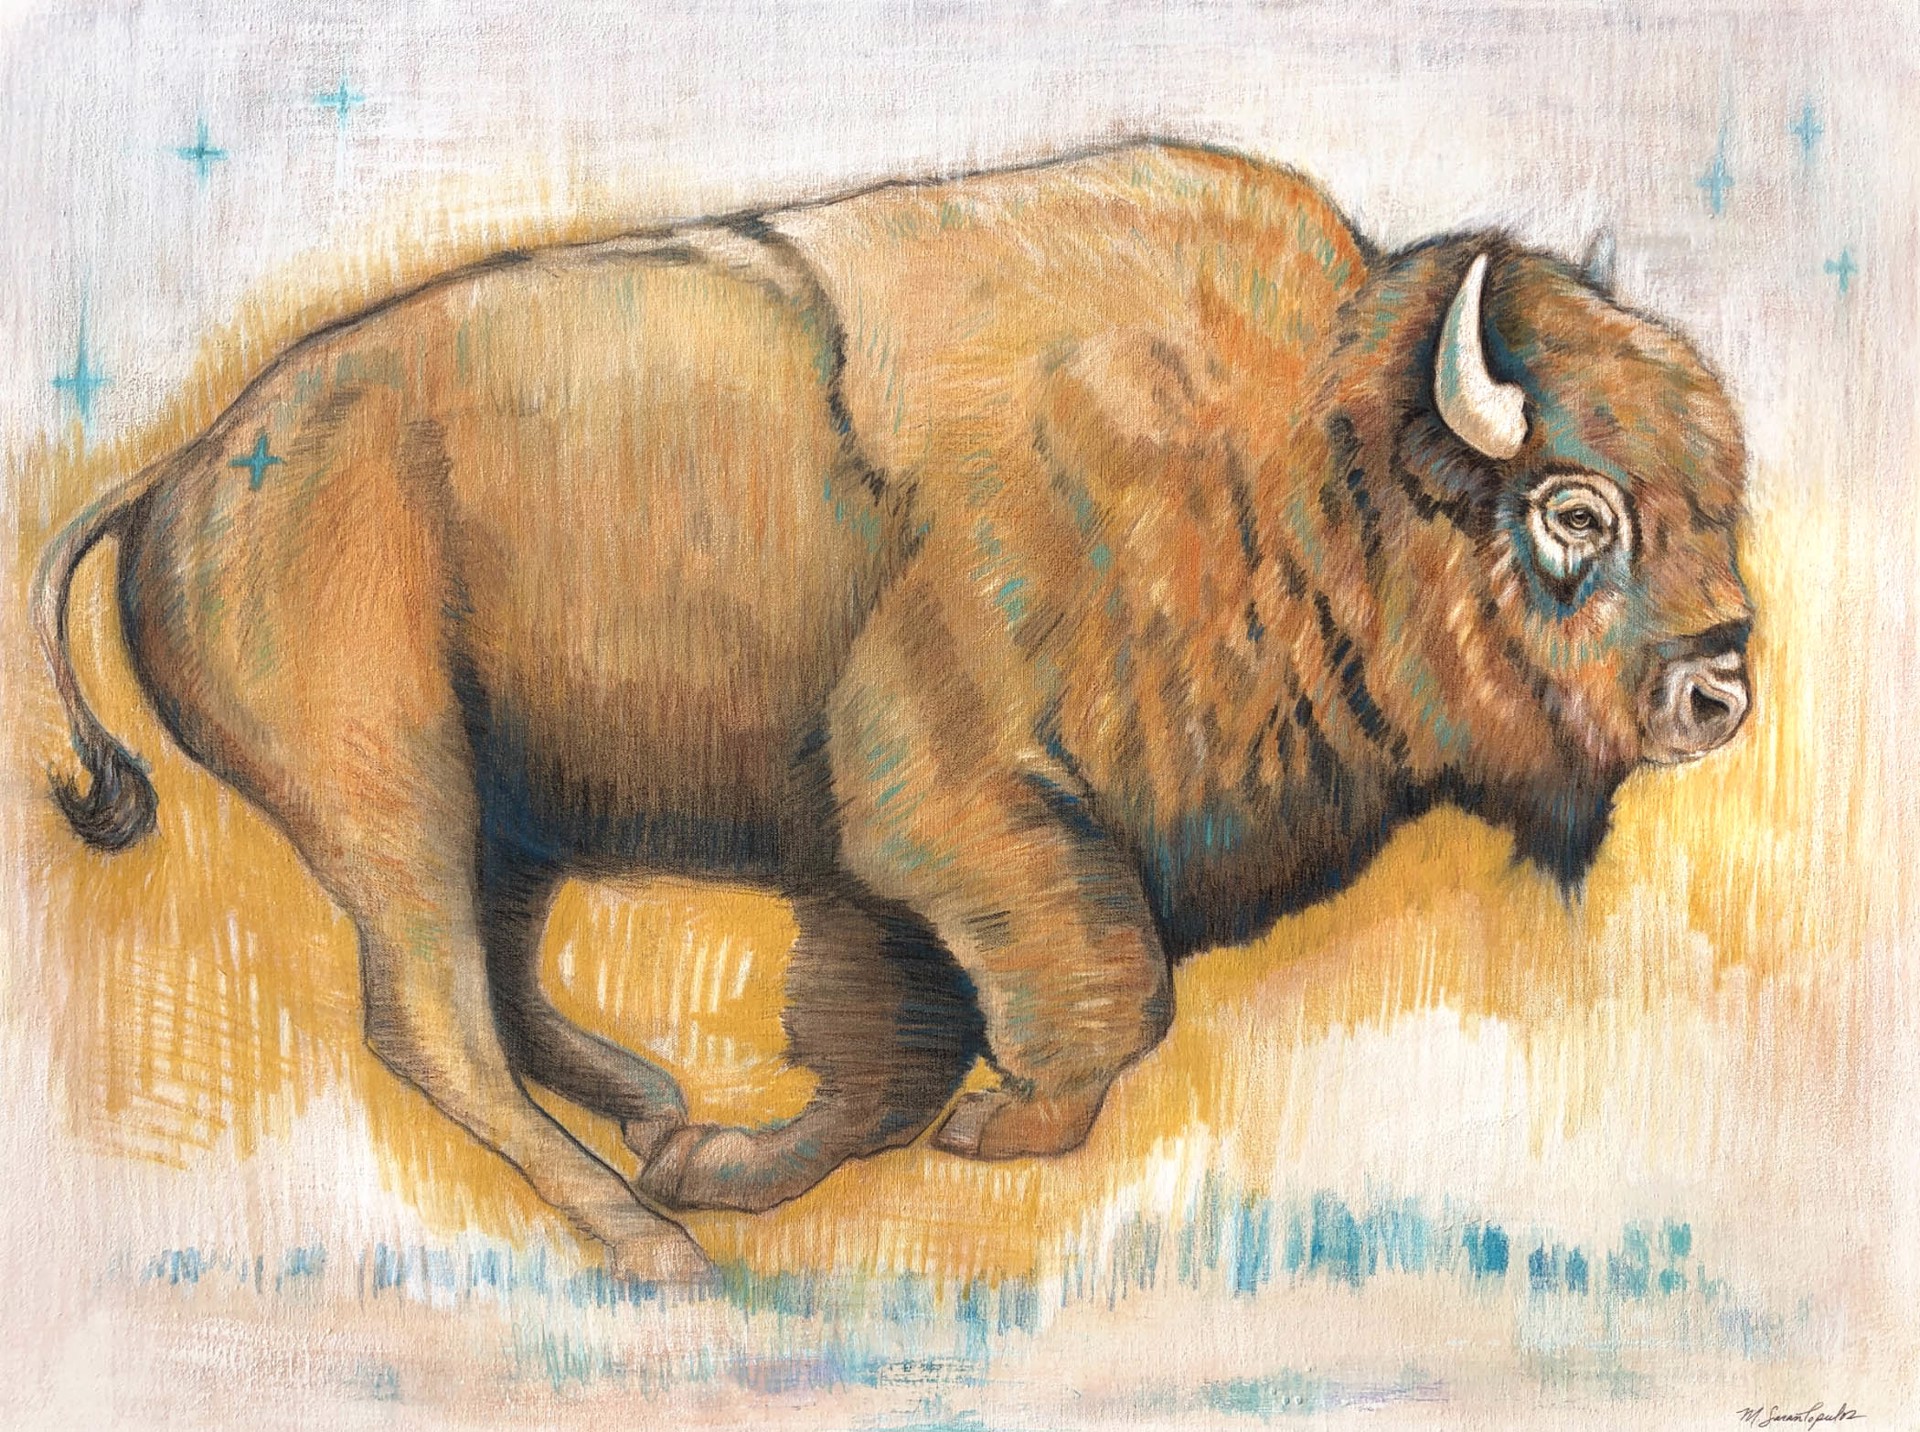 Original Mixed Media Painting Featuring A Running Bison Over Abstract Background